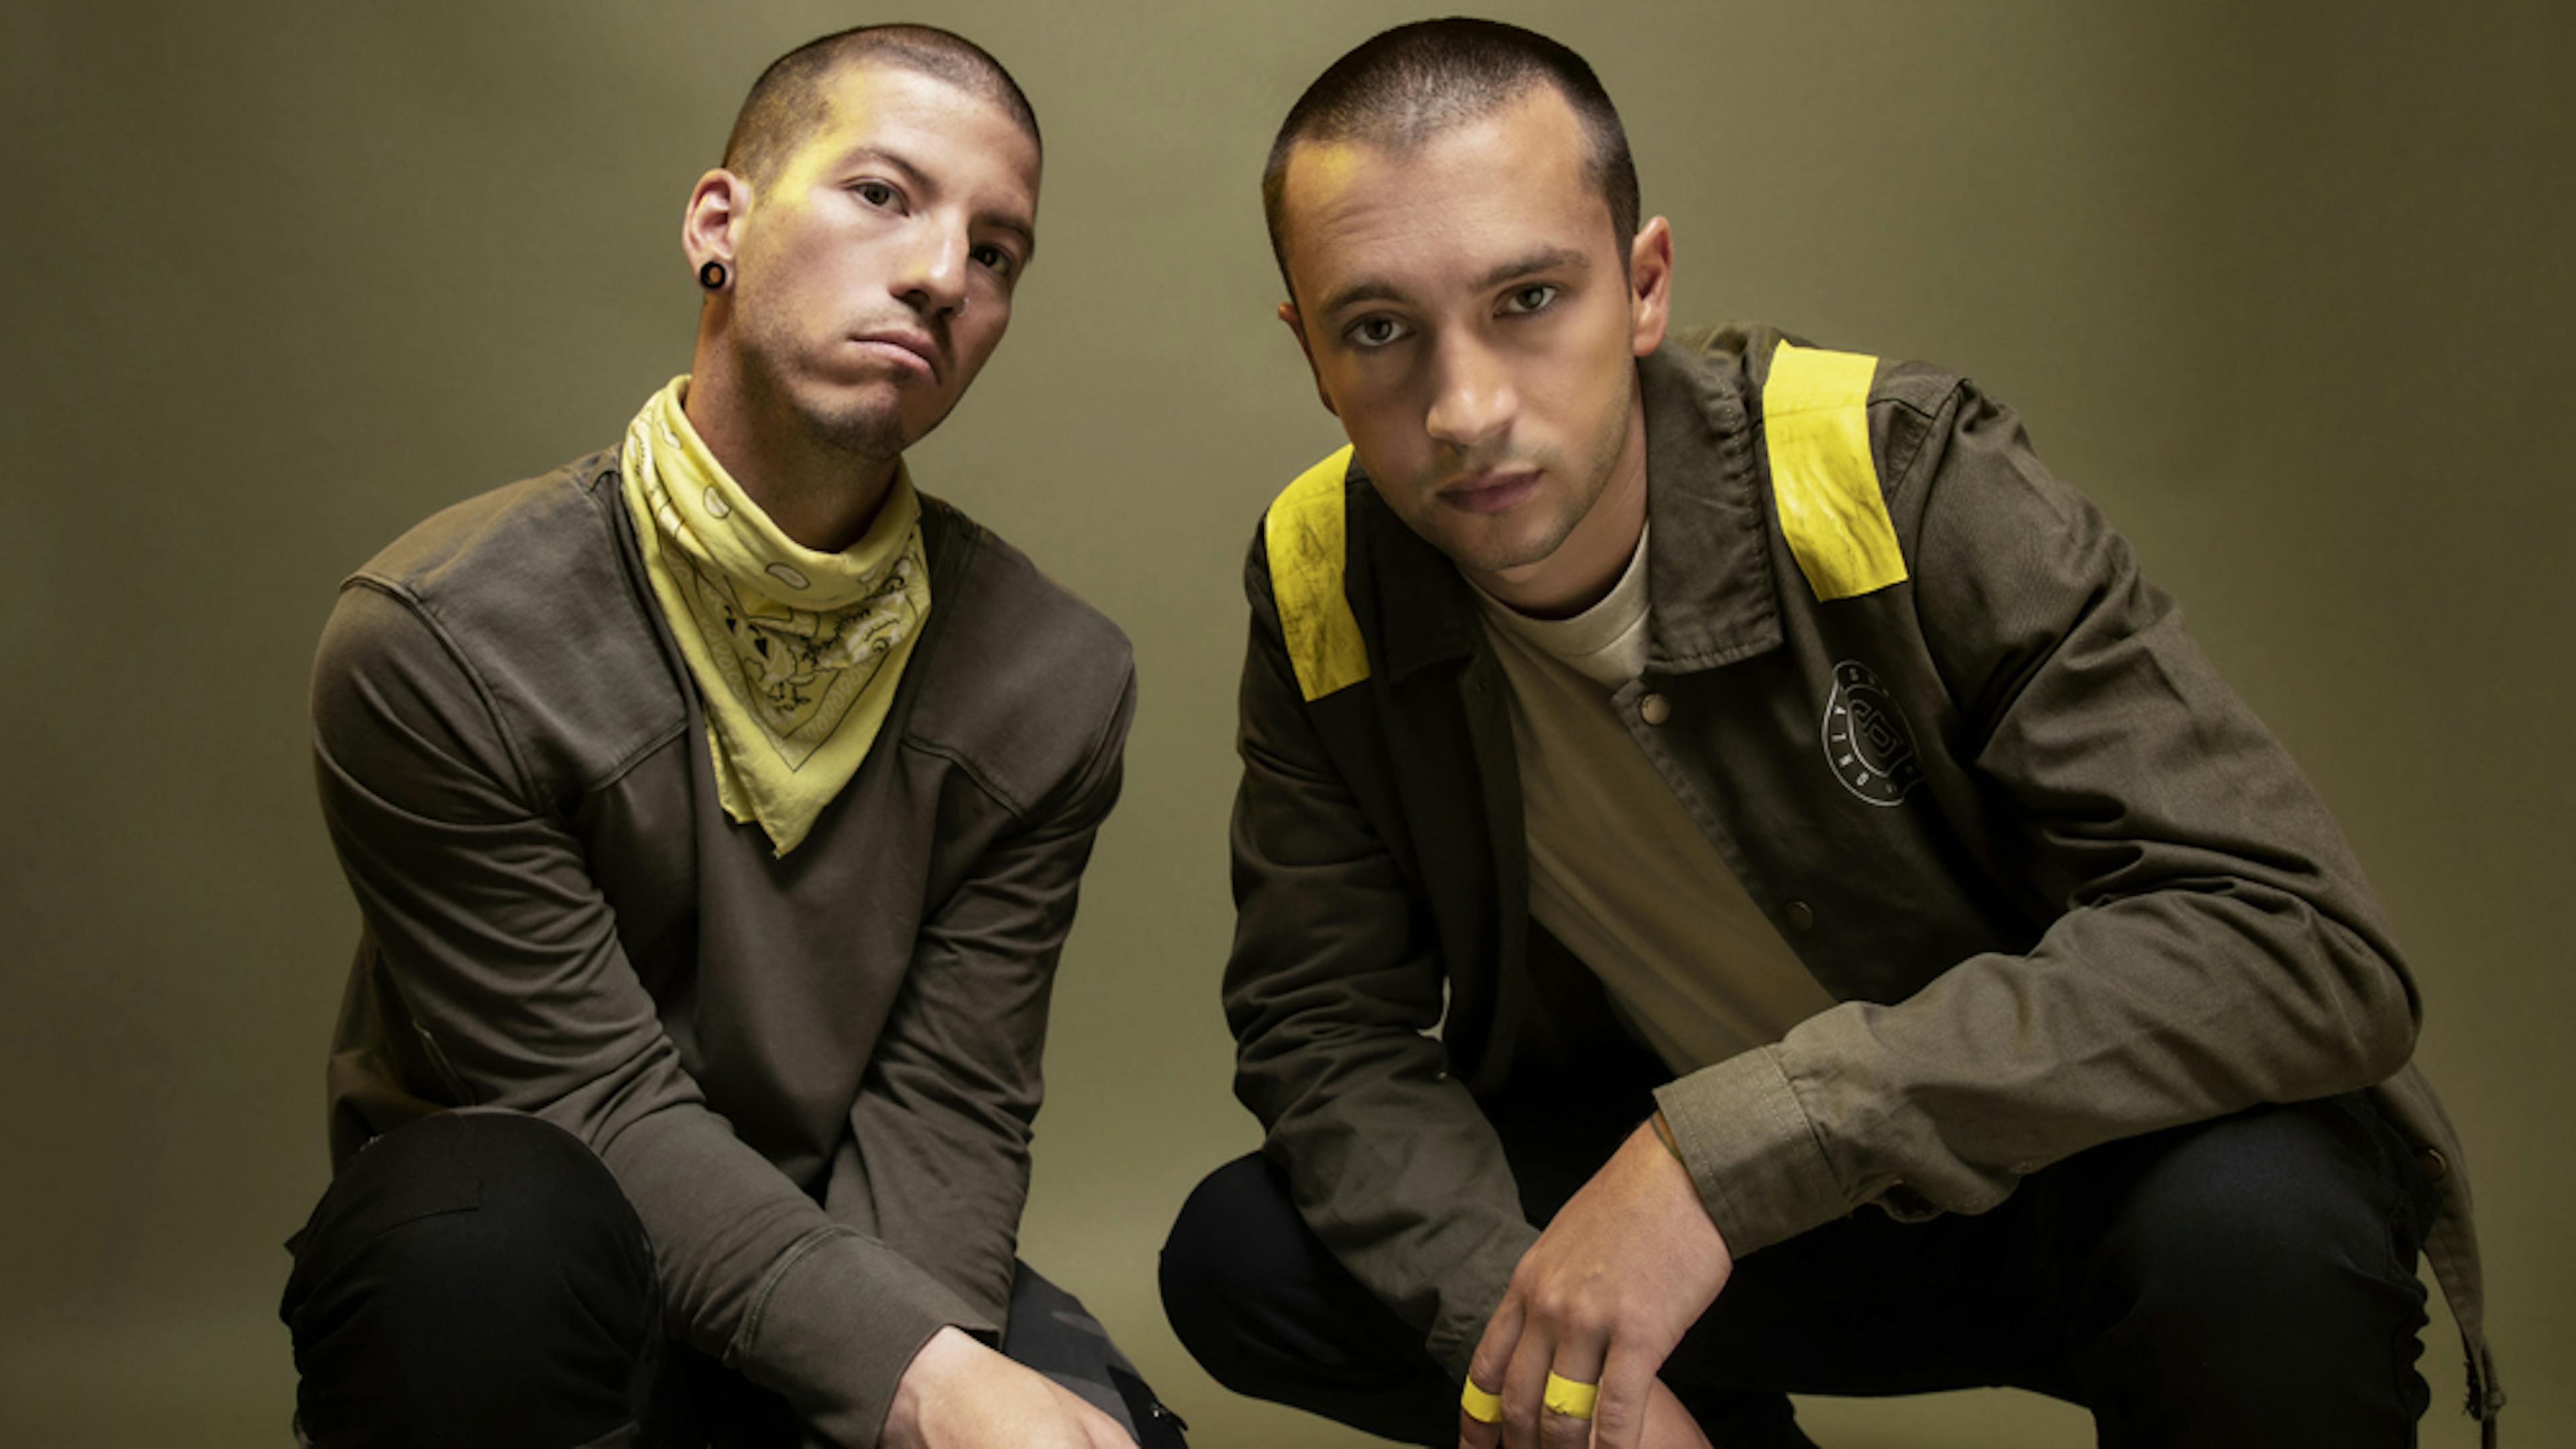 Tyler Joseph: "I Don’t Necessarily Want That External Reward To Solve Some Sort Of Internal Issue…"